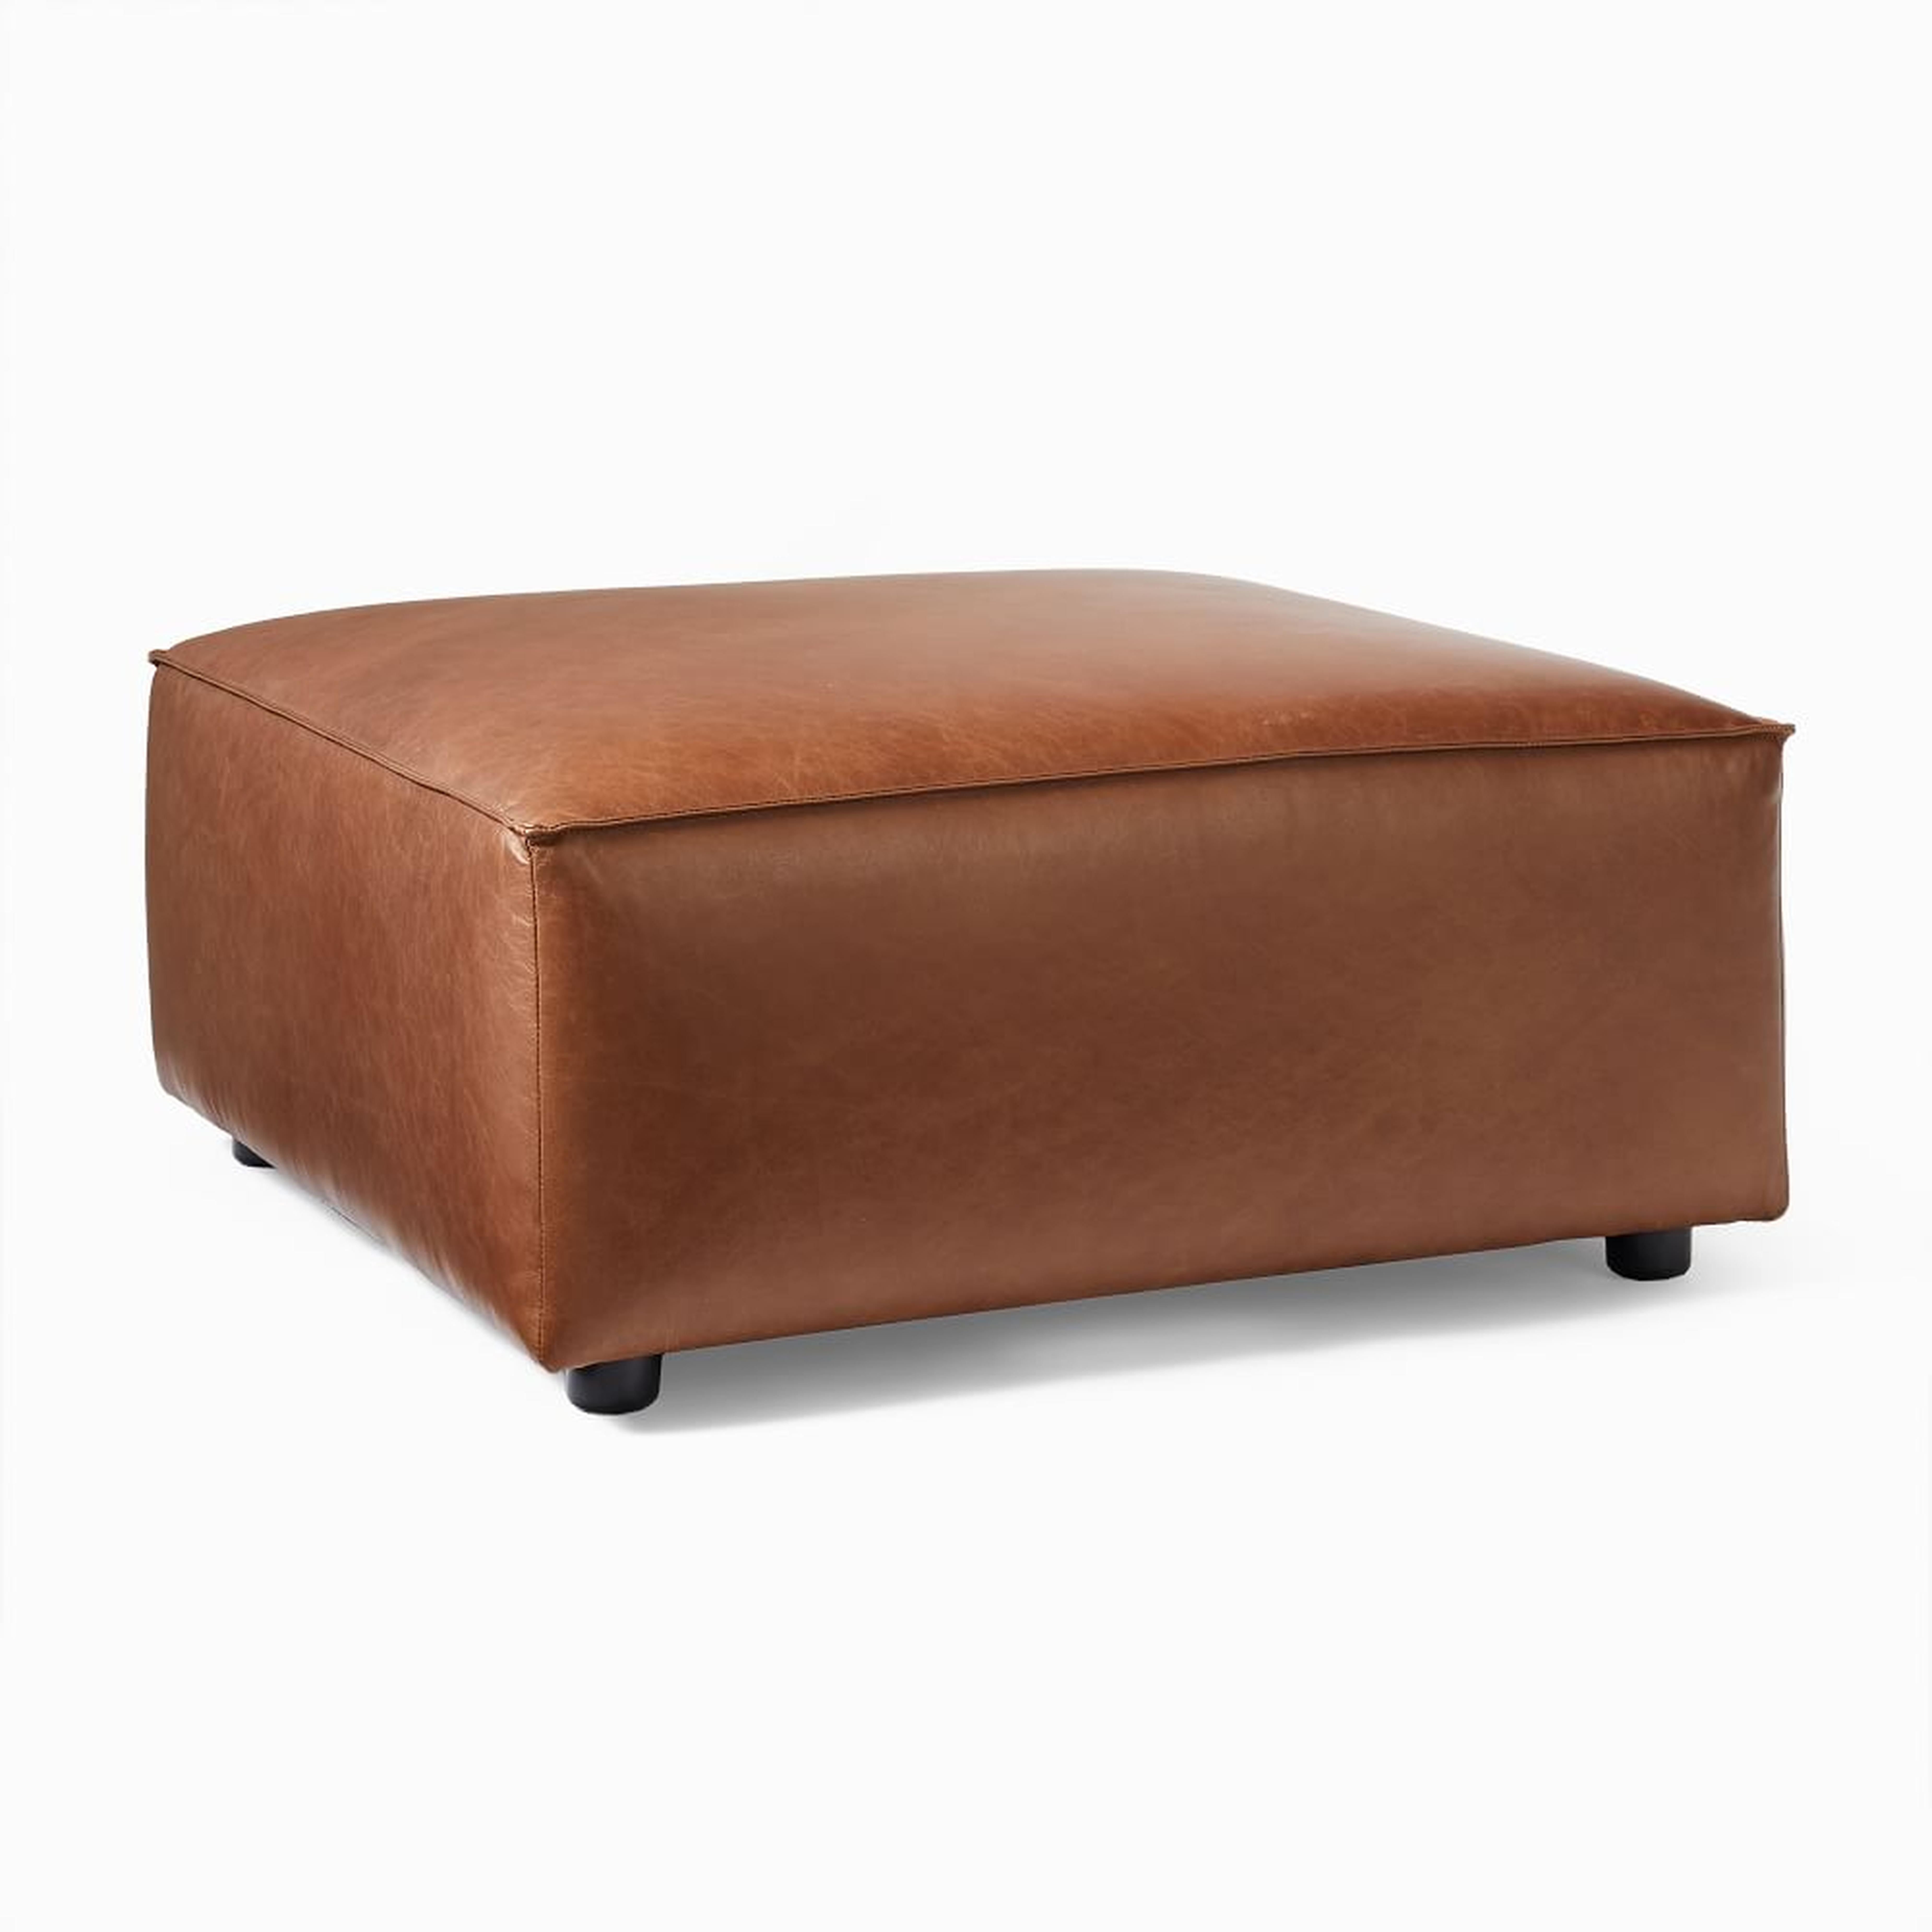 Remi Ottoman, Memory Foam, Vegan Leather, Saddle, Concealed Support - West Elm